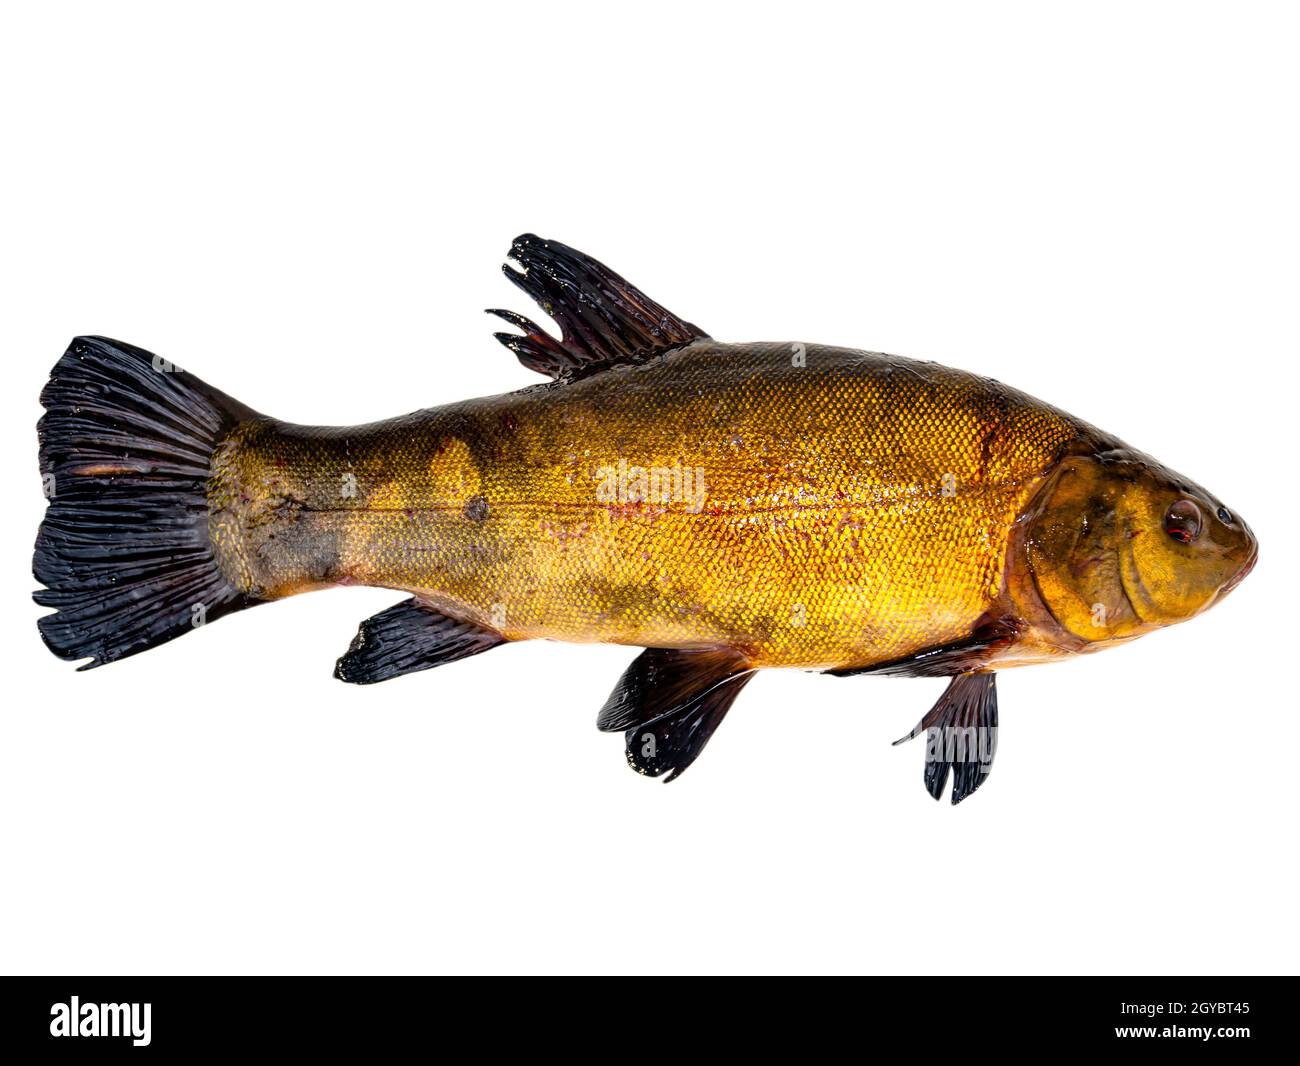 Freshwater fish tench on a white background. Fish tench. Freshwater fishing. Fishing catch. Underwater animals of lakes and rivers. Cooking food. Fins Stock Photo